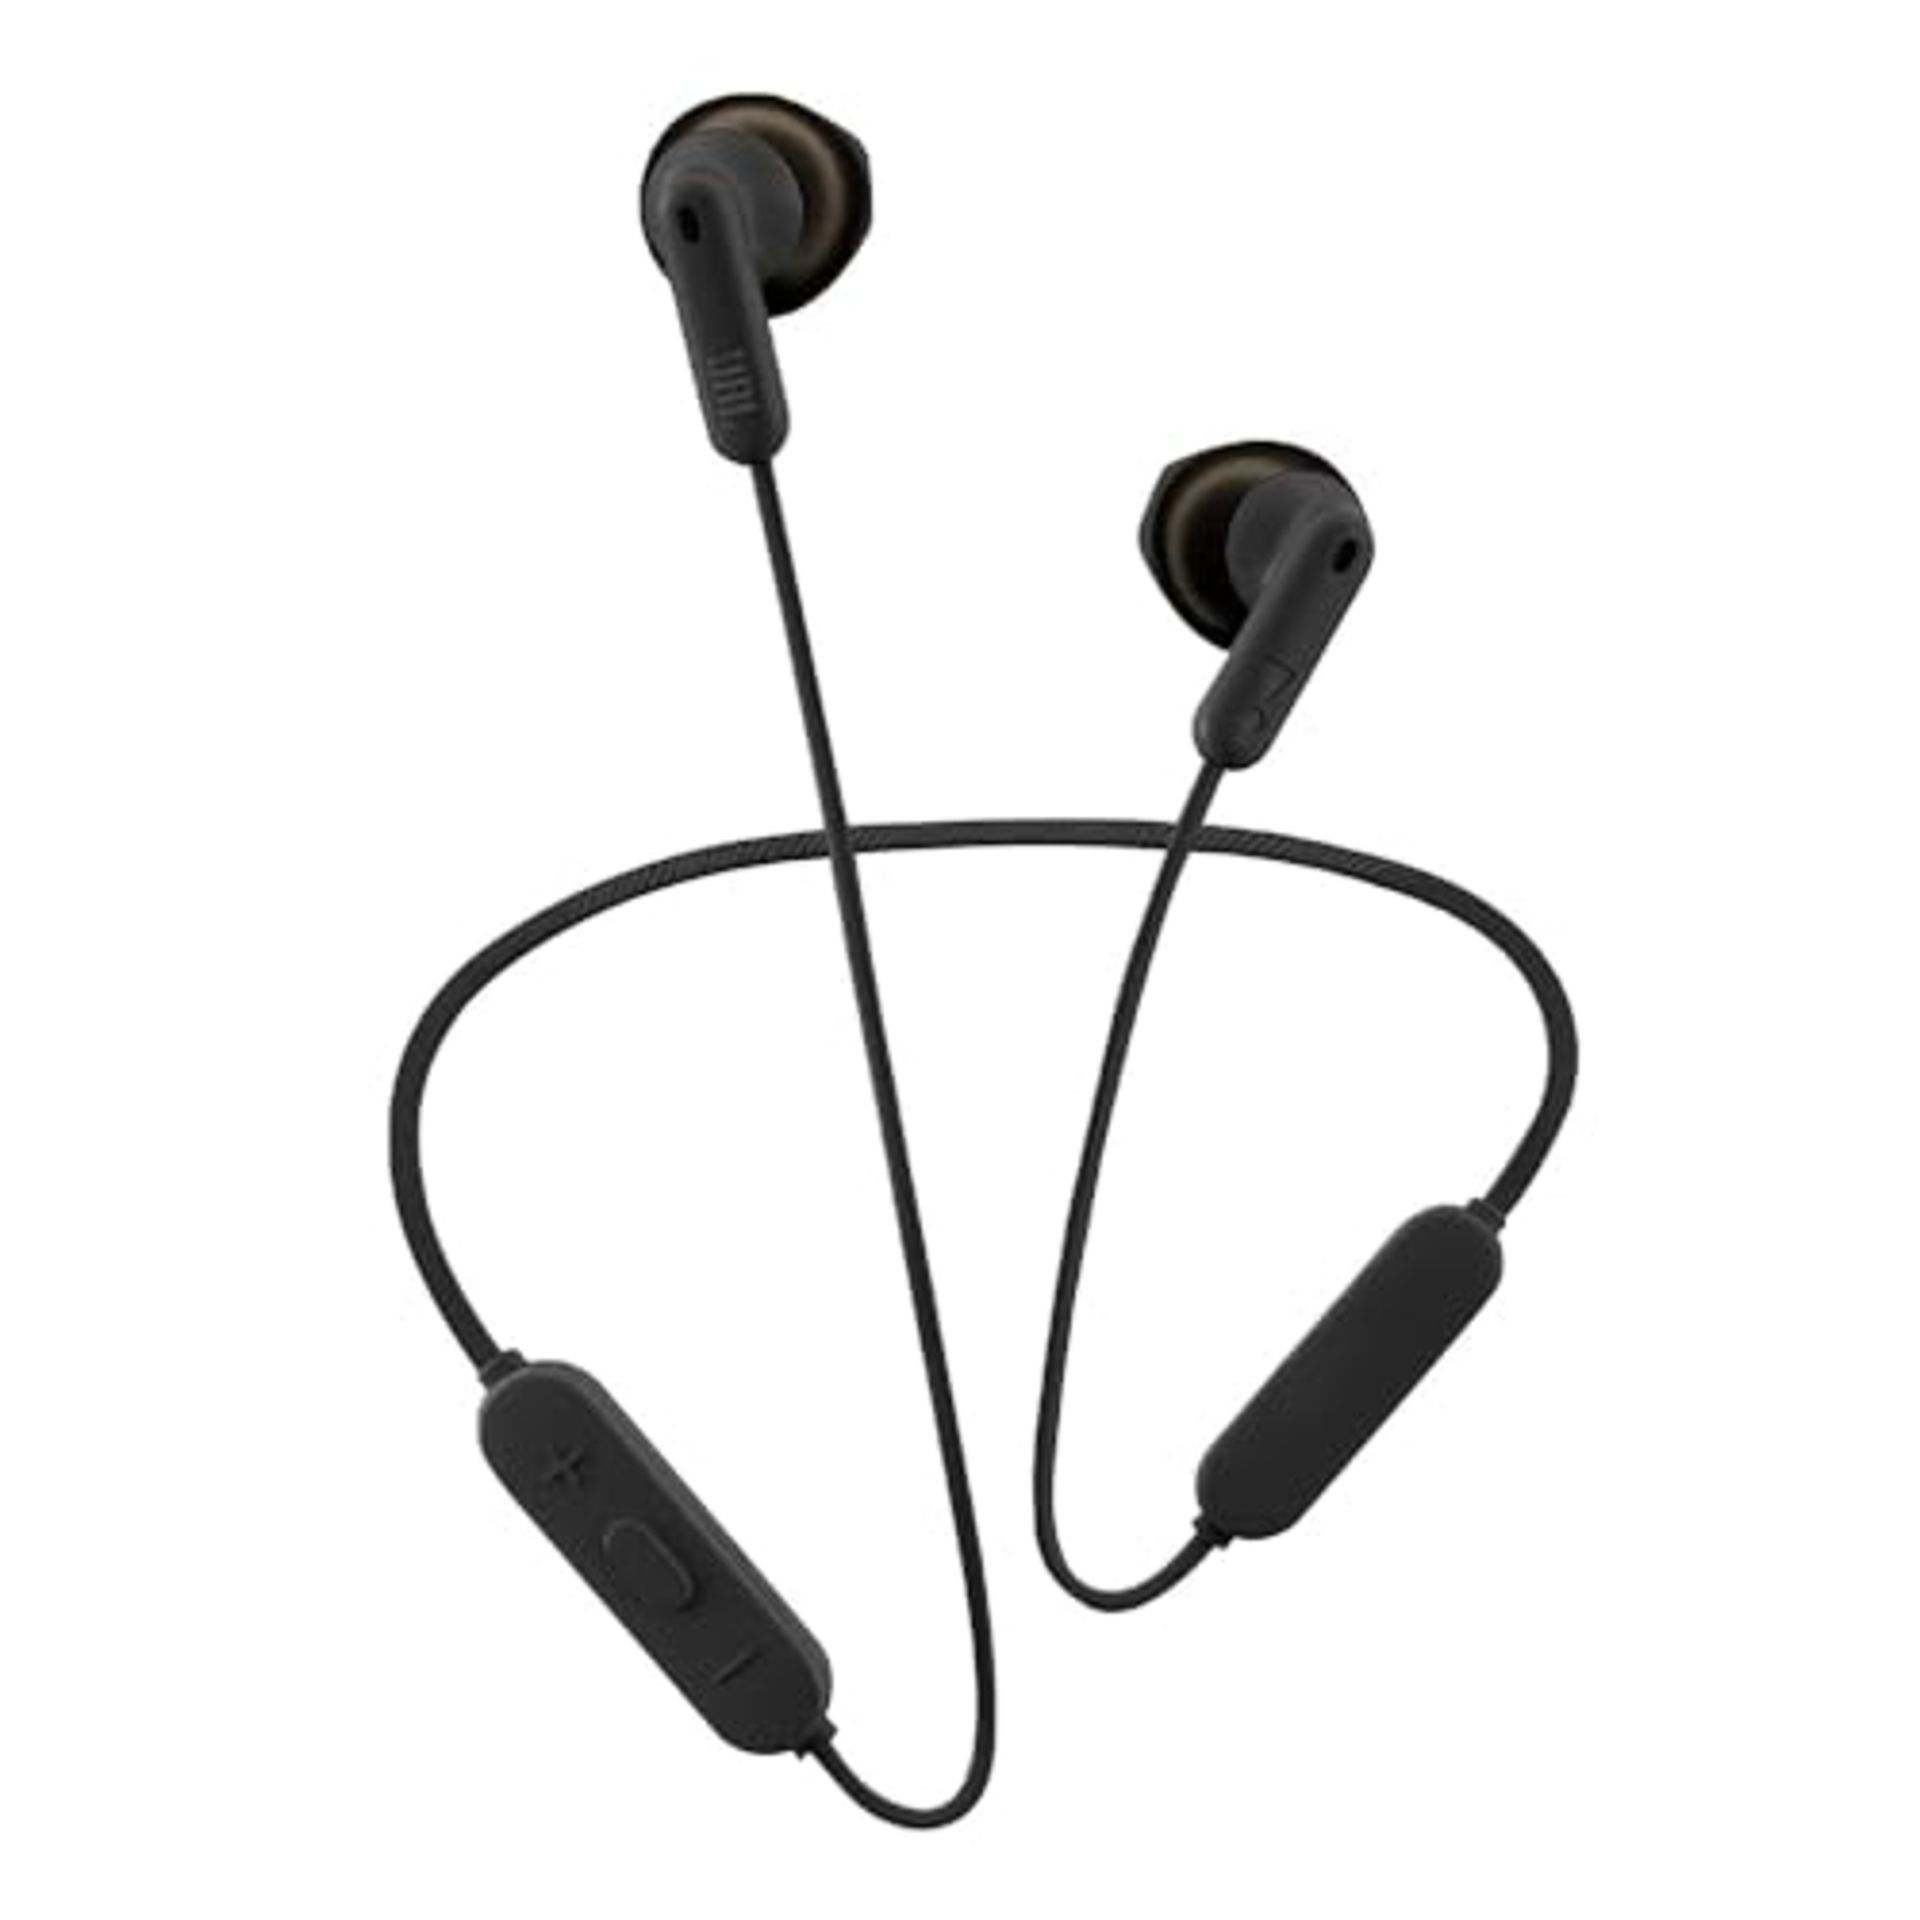 JBL TUNE 215 BT - Bluetooth in-ear headphones in black - Powerful bass sound without c - Image 4 of 6